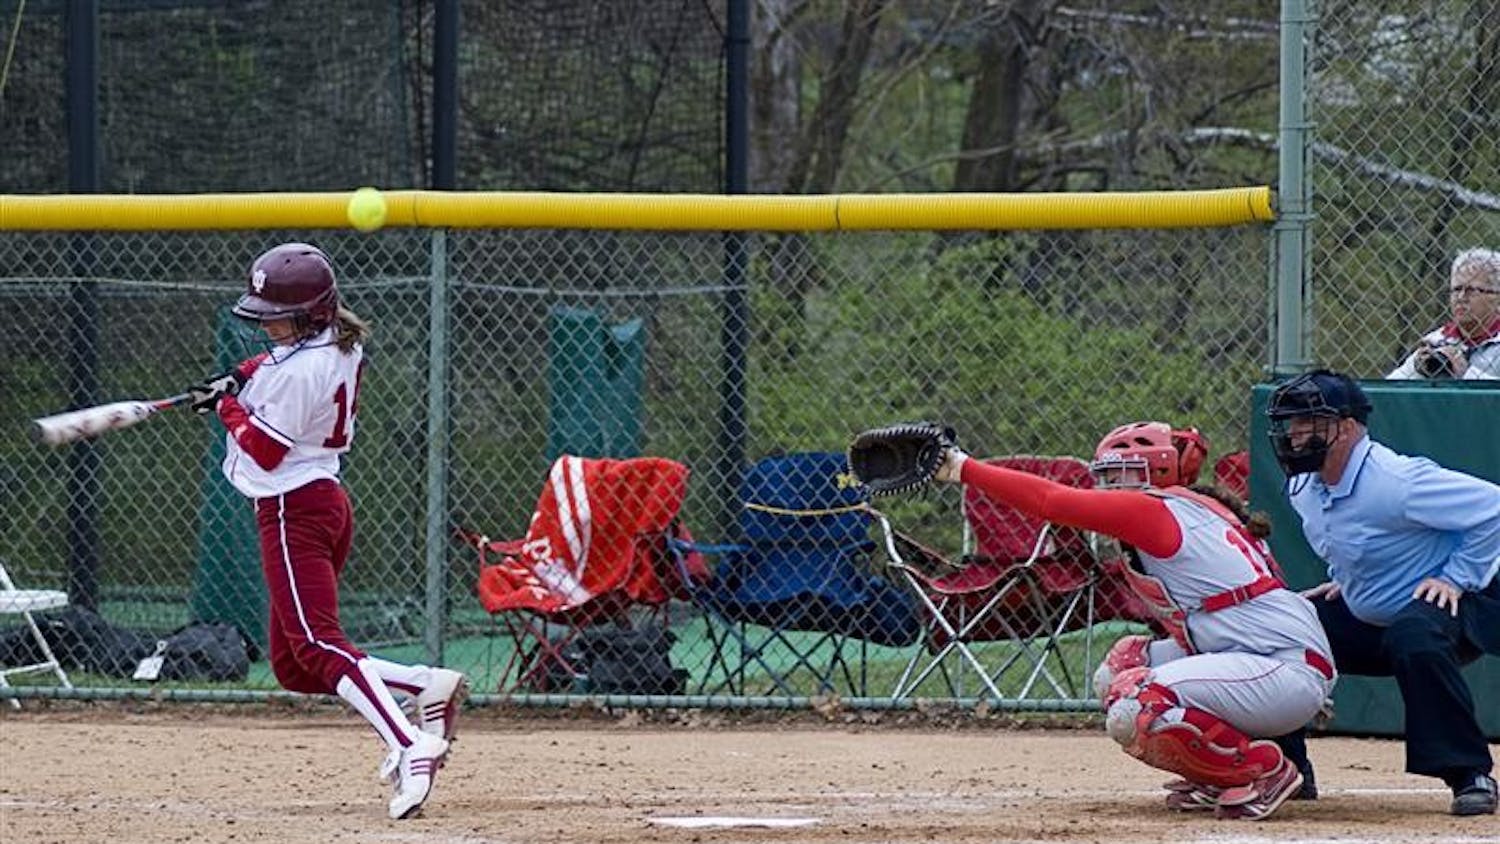 Junior Kelli Ritchison fouls off against Ohio State on Wednesday afternoon at the IU Softball Field. The Hoosiers have a doubleheader in Champaign, Ill. on Wednesday.